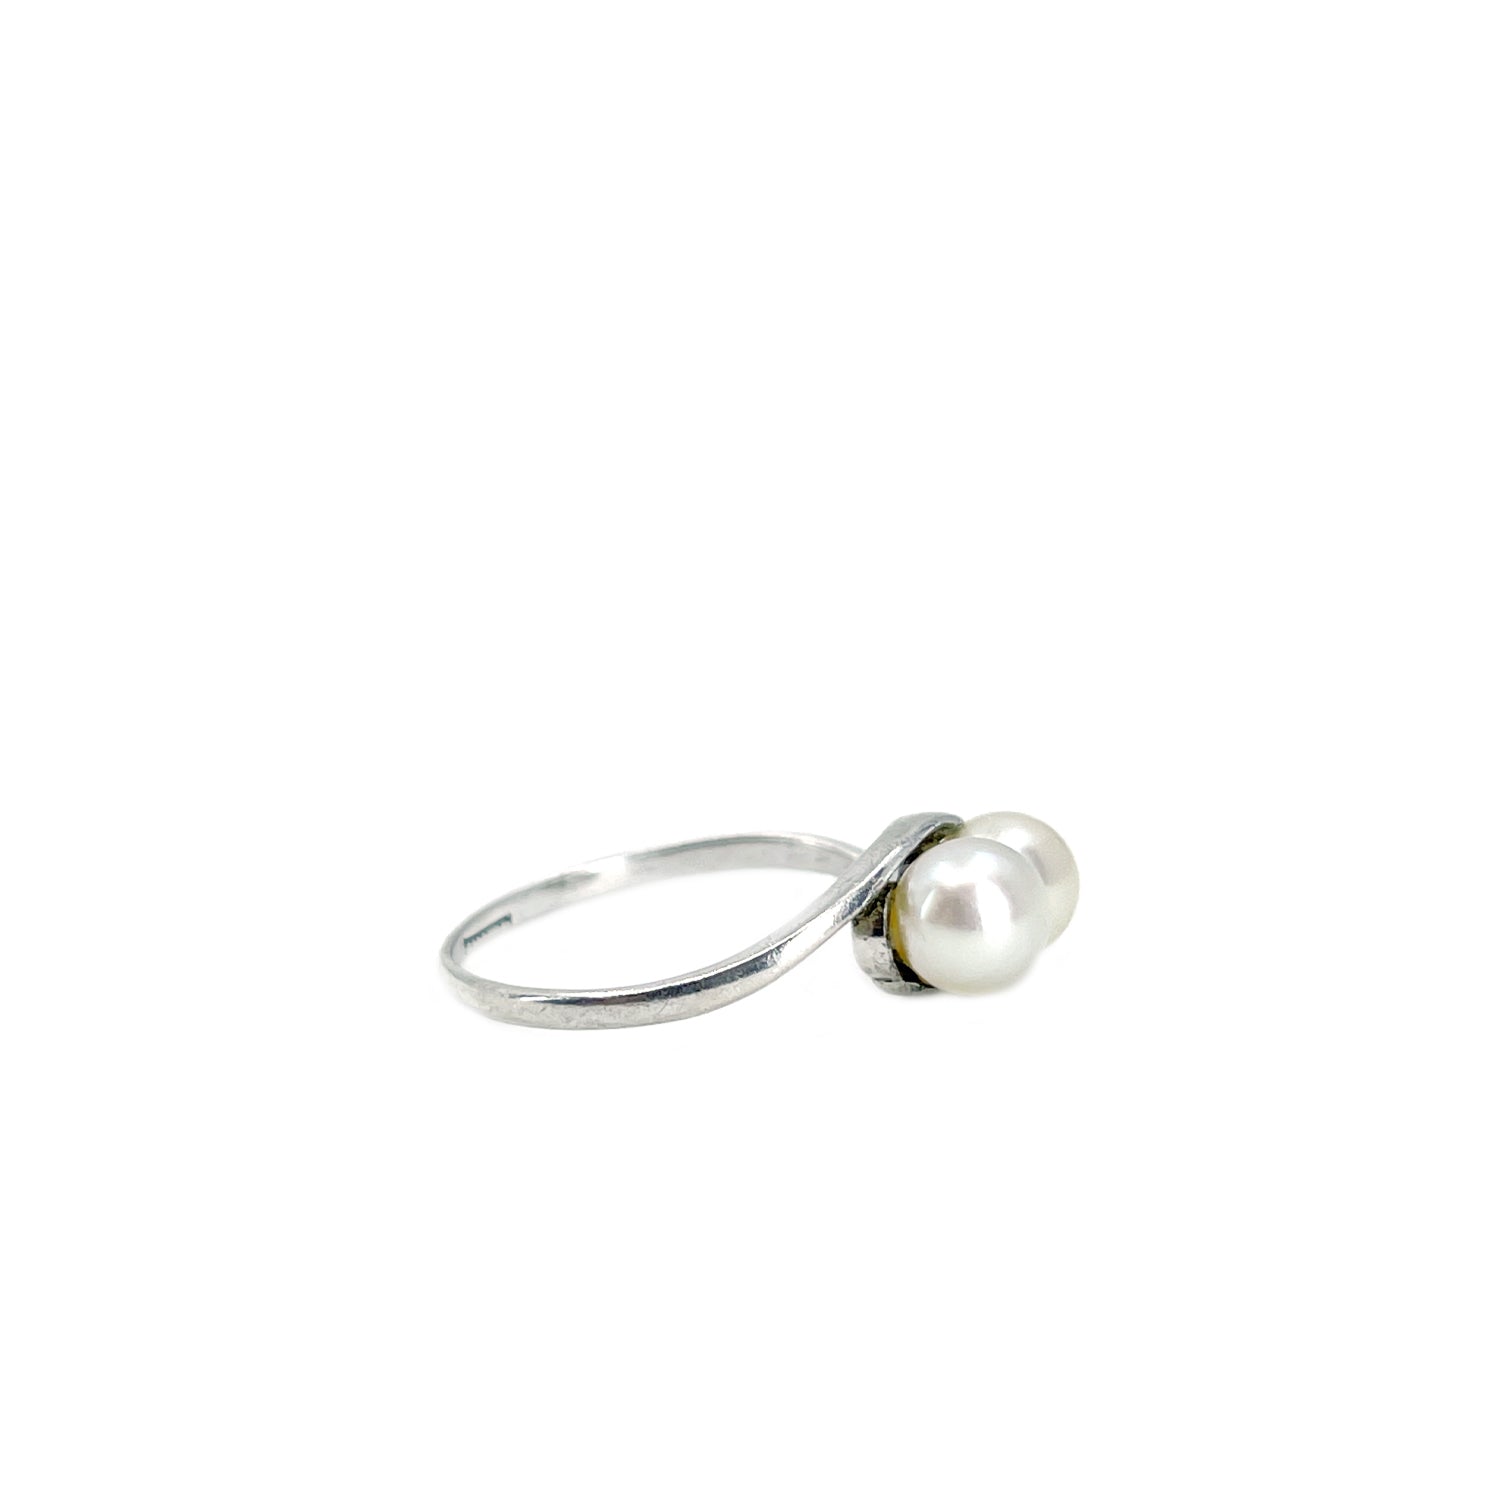 Retro Bypass Double Japanese Saltwater Akoya Cultured Pearl Ring- Sterling Silver Sz 7 3/4